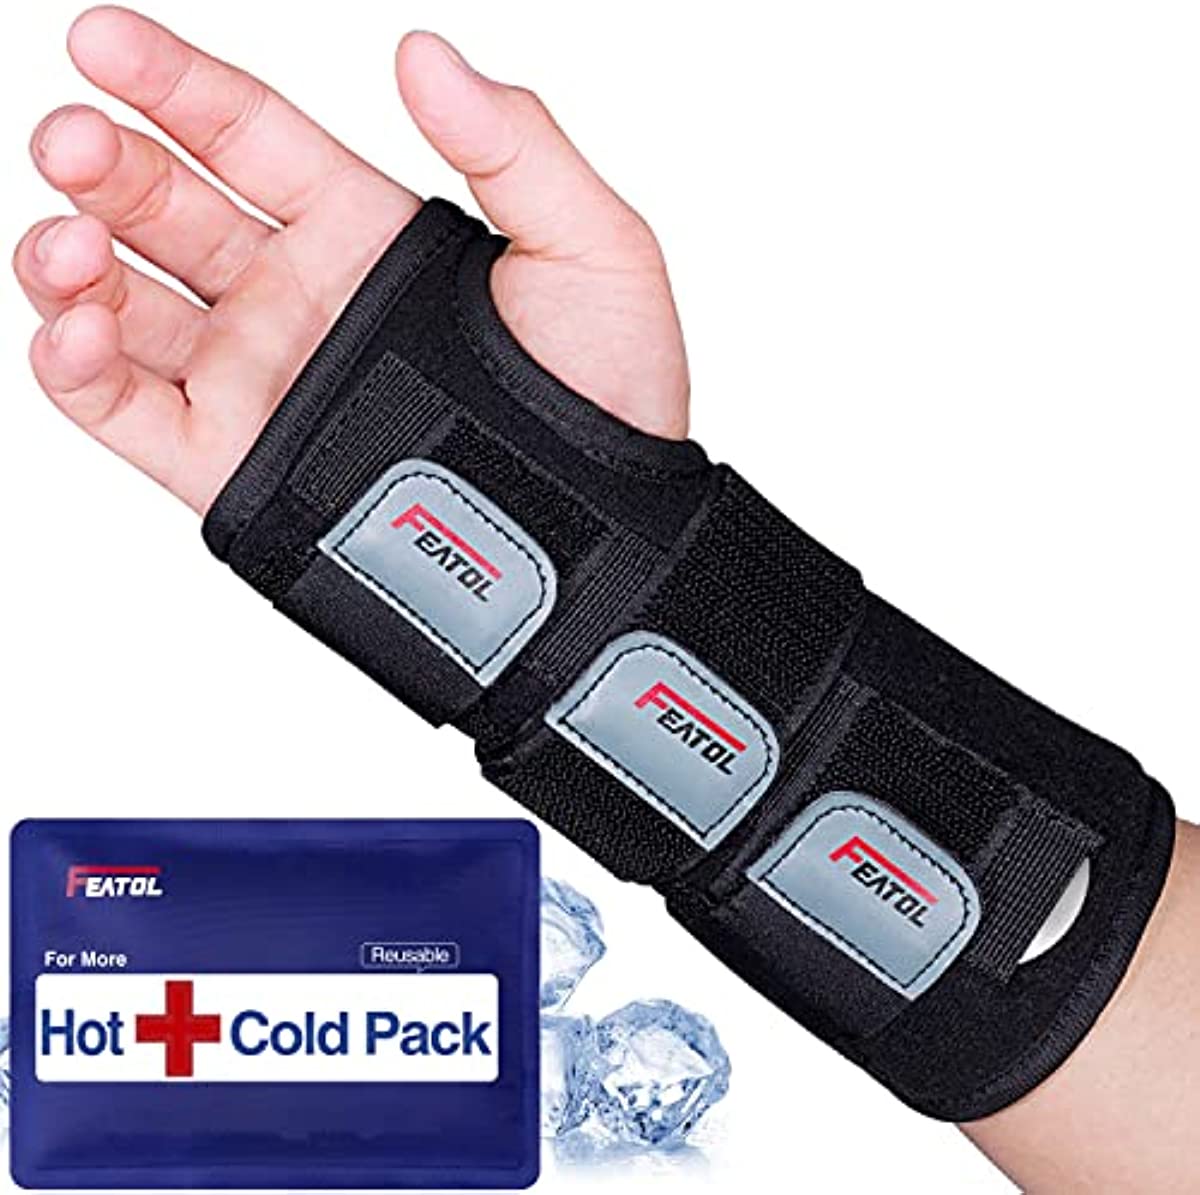 Wrist Brace Carpal Tunnel, Night Support Brace with Wrist Splint, Adjustable Straps, Hot/Ice Pack, Hand Brace for Women and Men, Right Hand, Large/X-Large, Tendinitis, Arthritis, Pain Relief